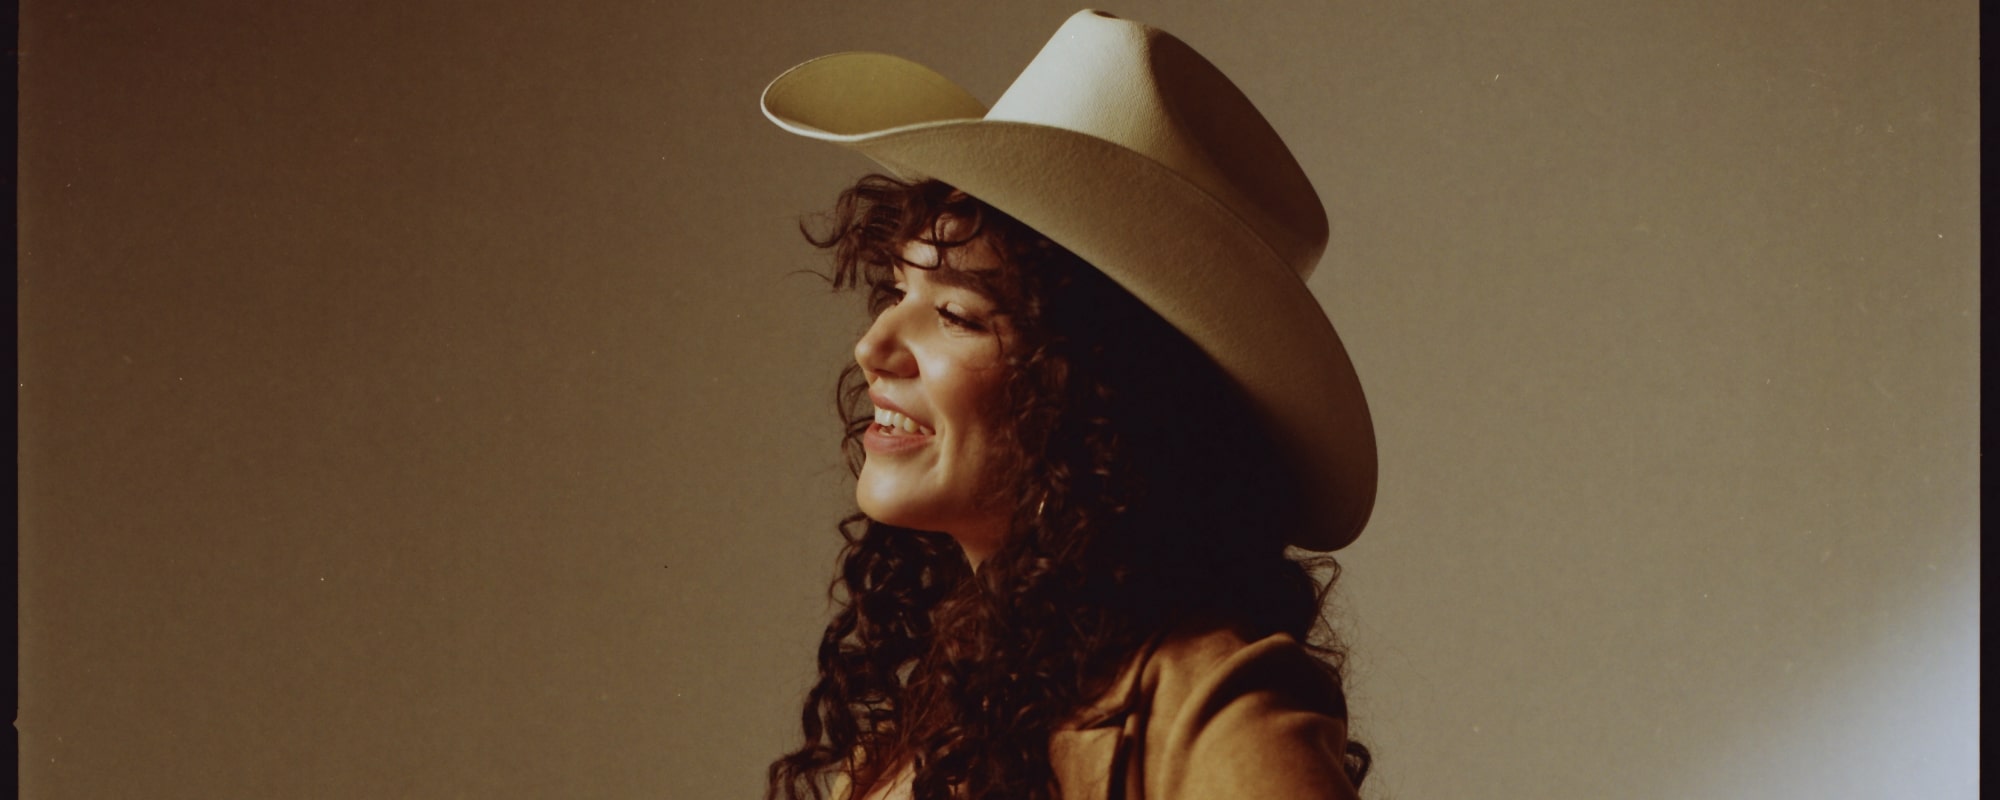 Emily Nenni Introduces Her Next Album ‘Drive & Cry’ with Honky Tonkin’ Toe-Tapper “Get to Know Ya”